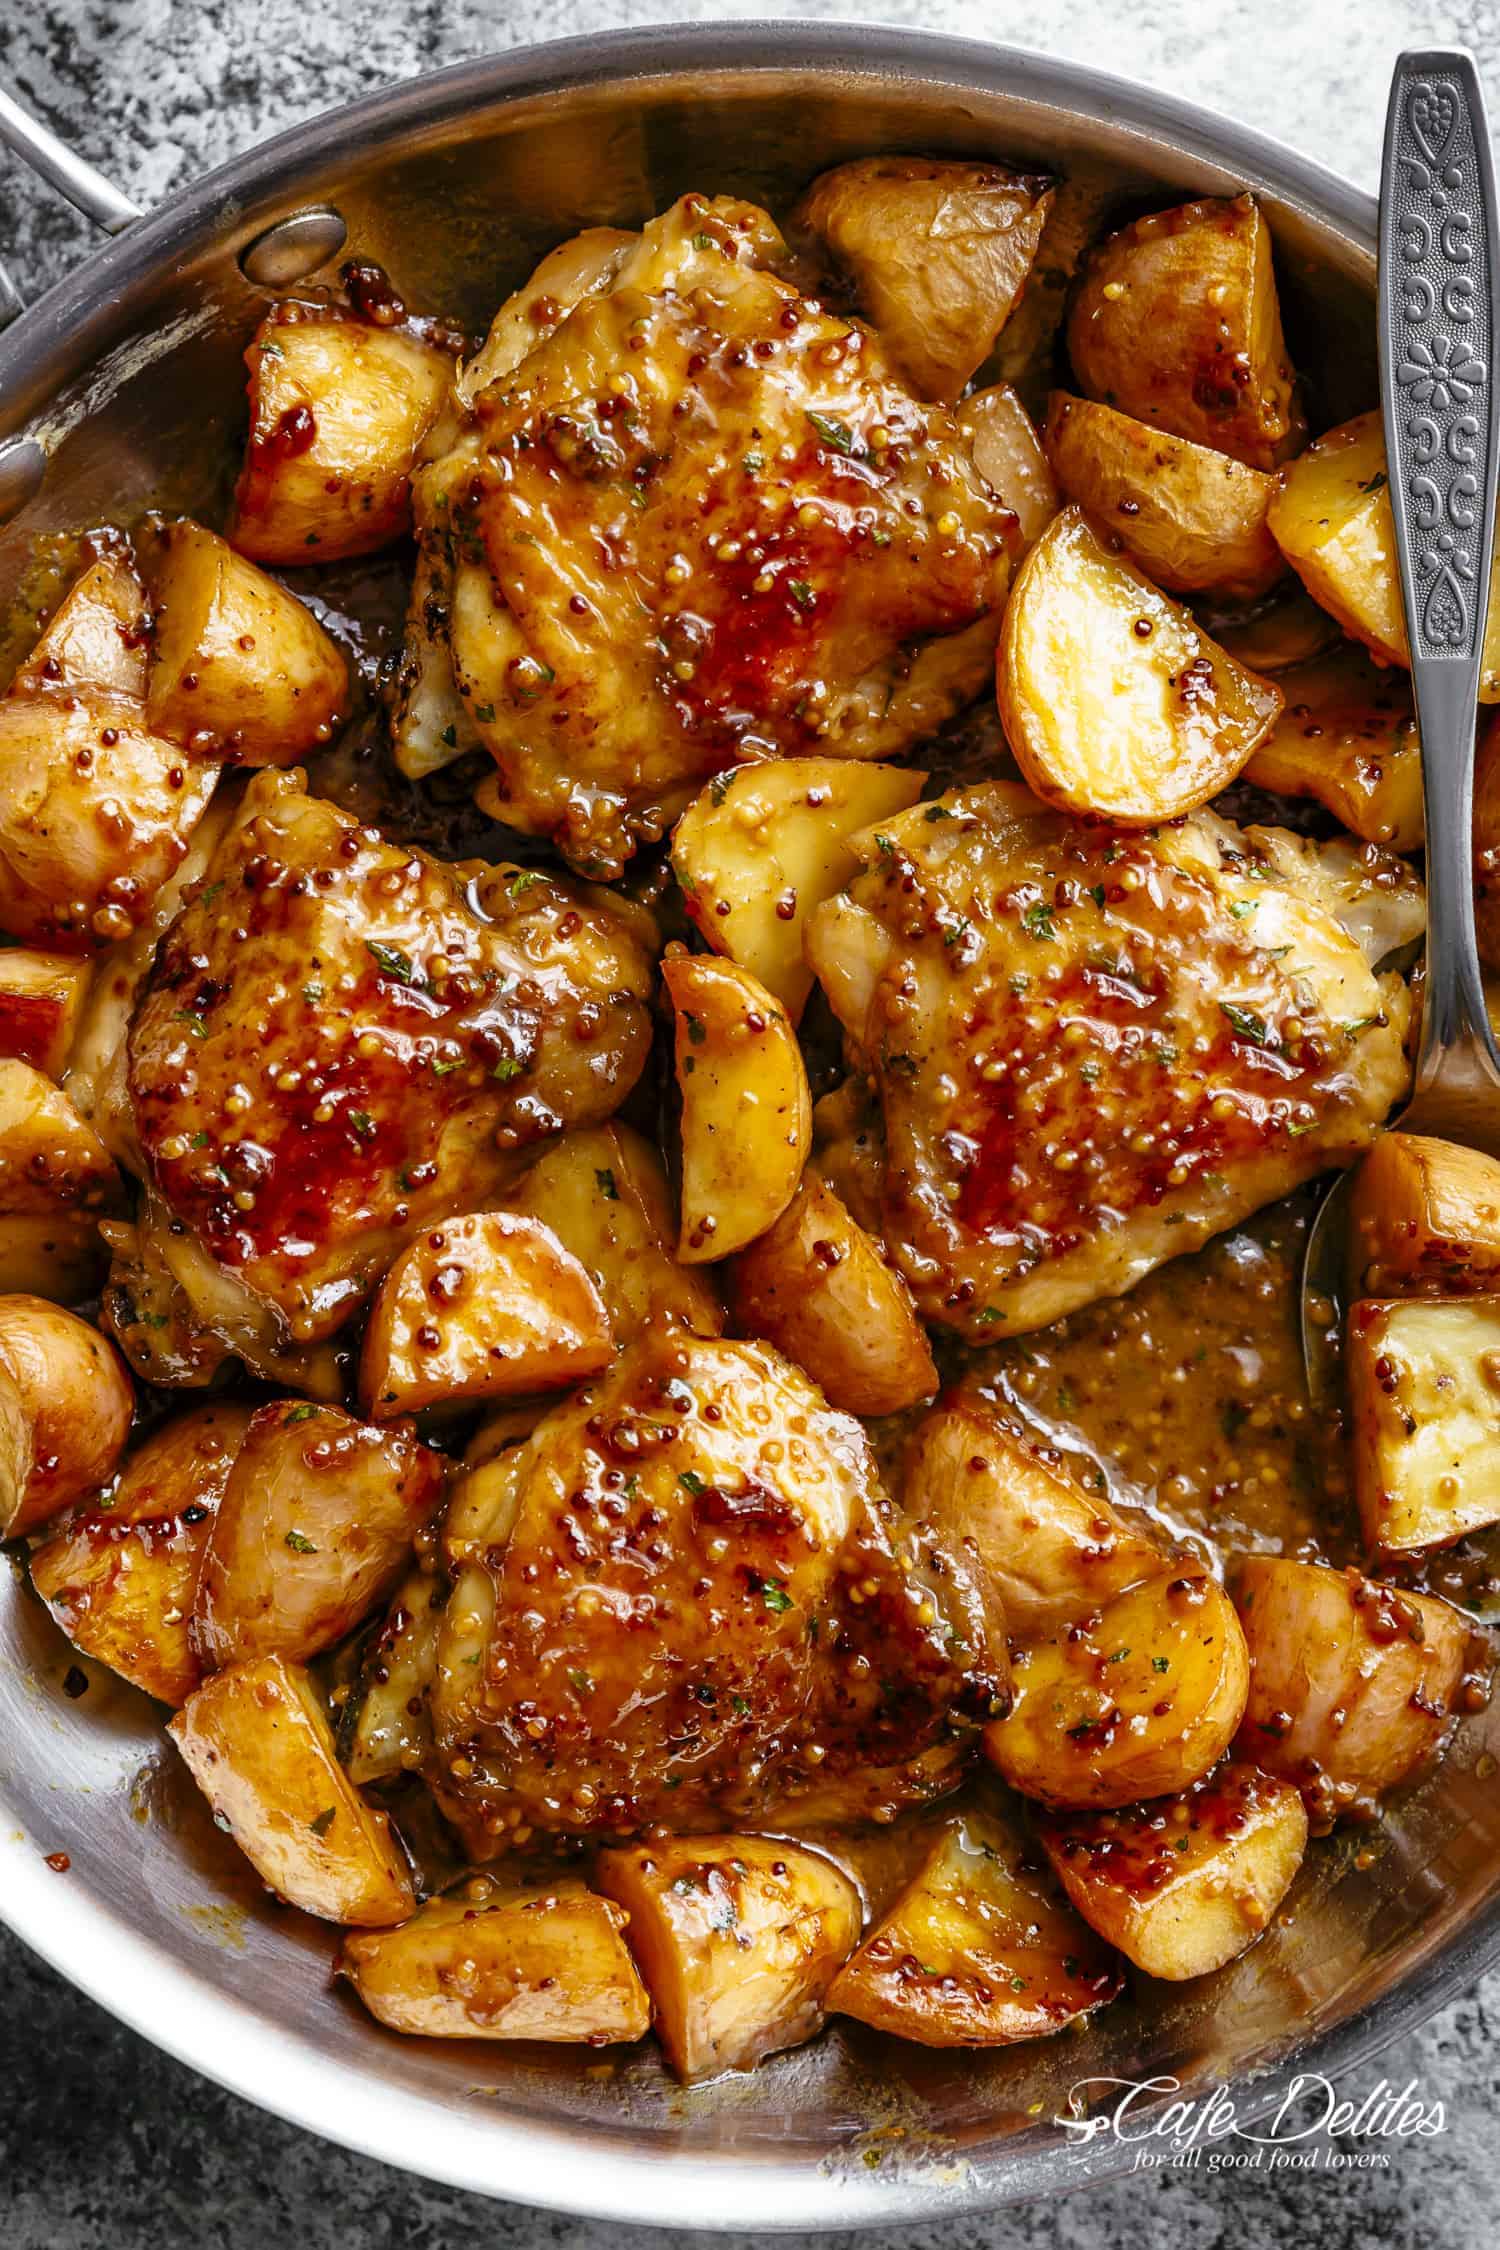 Dutch Oven Chicken And Potatoes: Simple Ingredient One Pot Meal